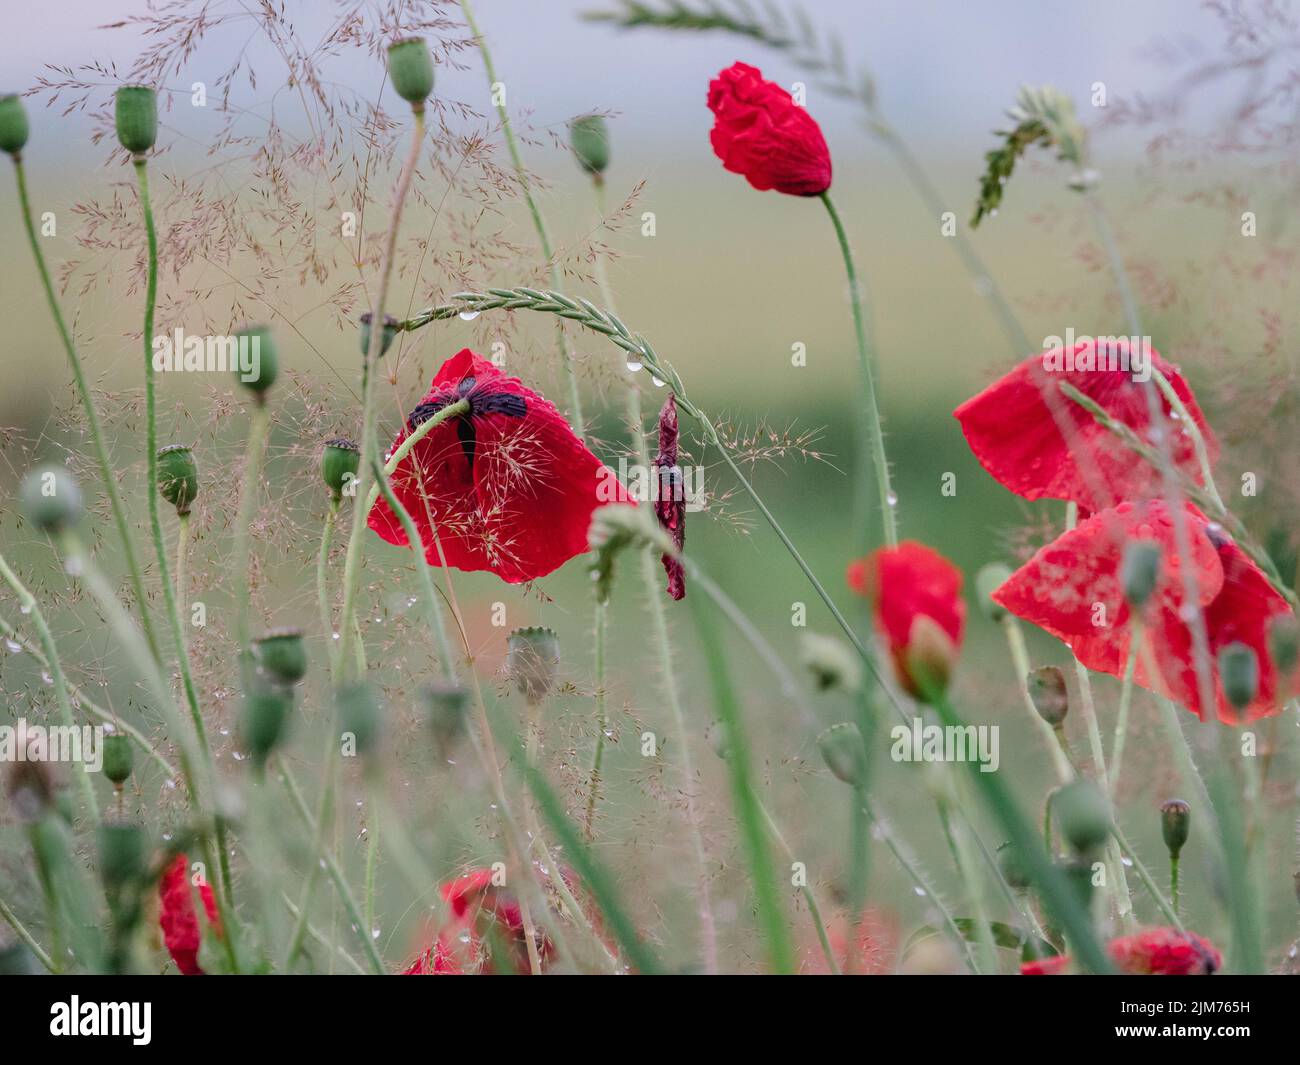 A scenic view of red poppy flowers on a field on a blurred background Stock Photo